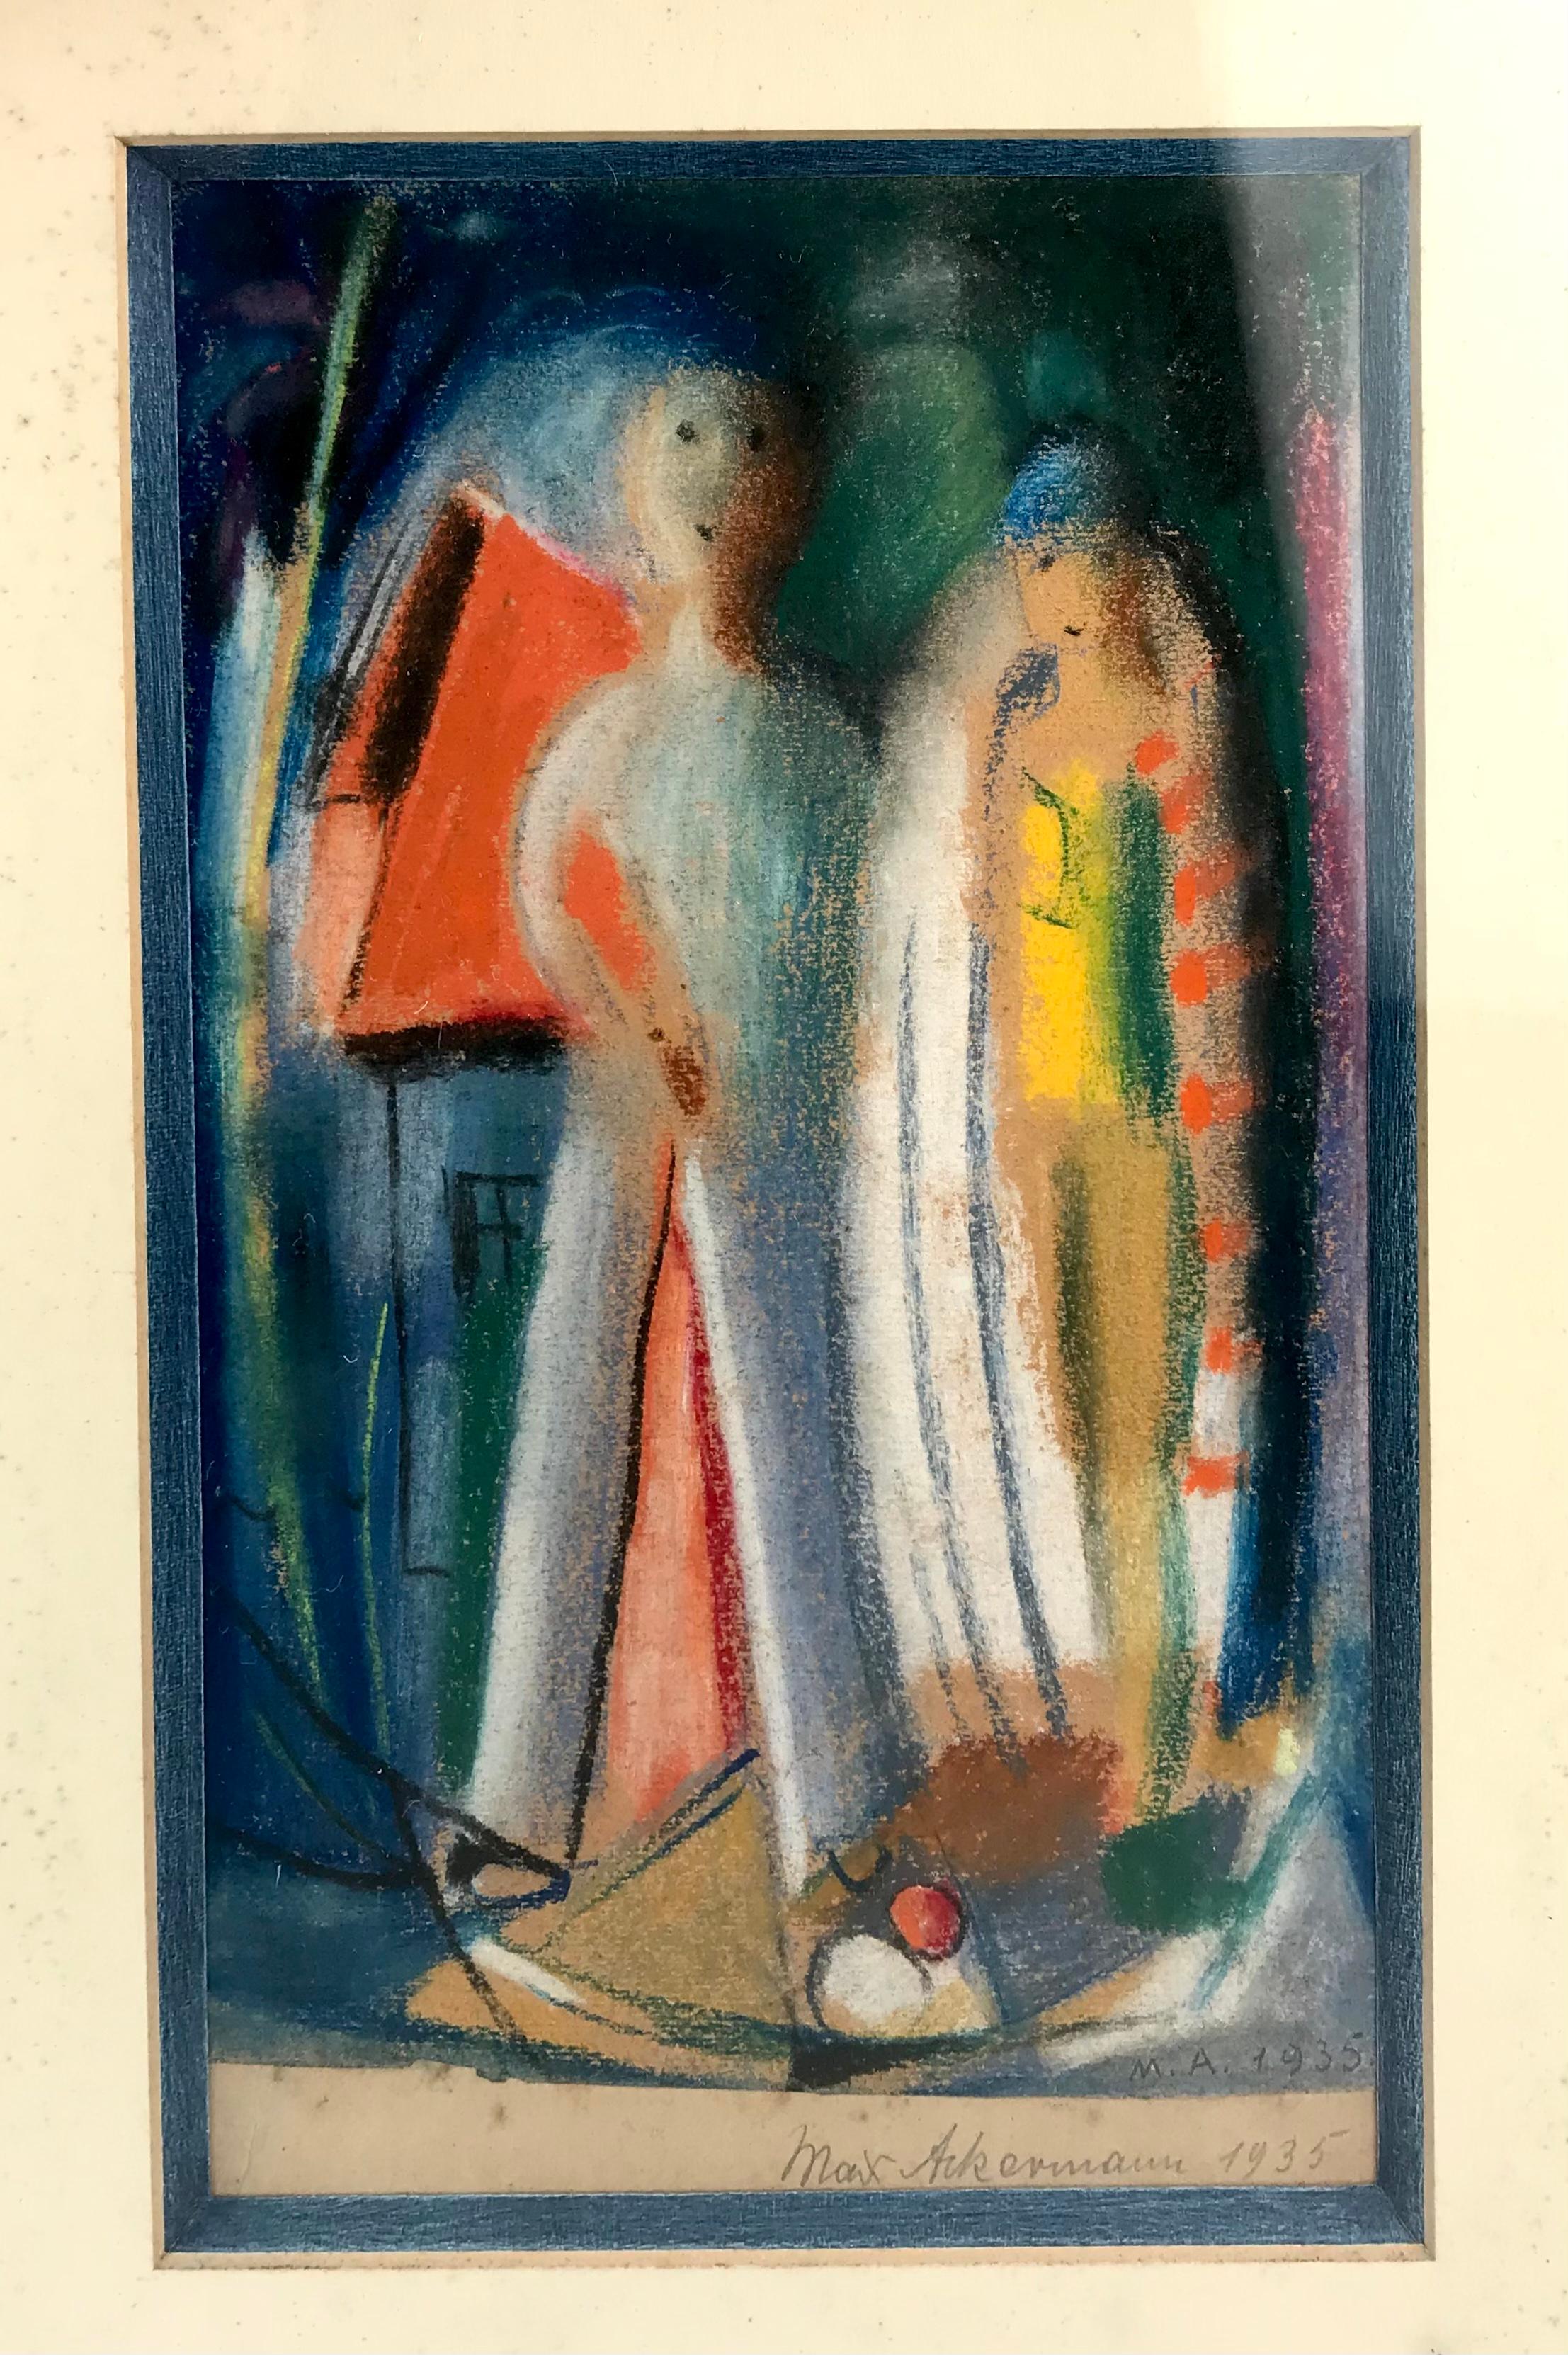 Max Ackermann Modernist Original Painting Germany 1935 Stuttgart In Good Condition For Sale In London, GB